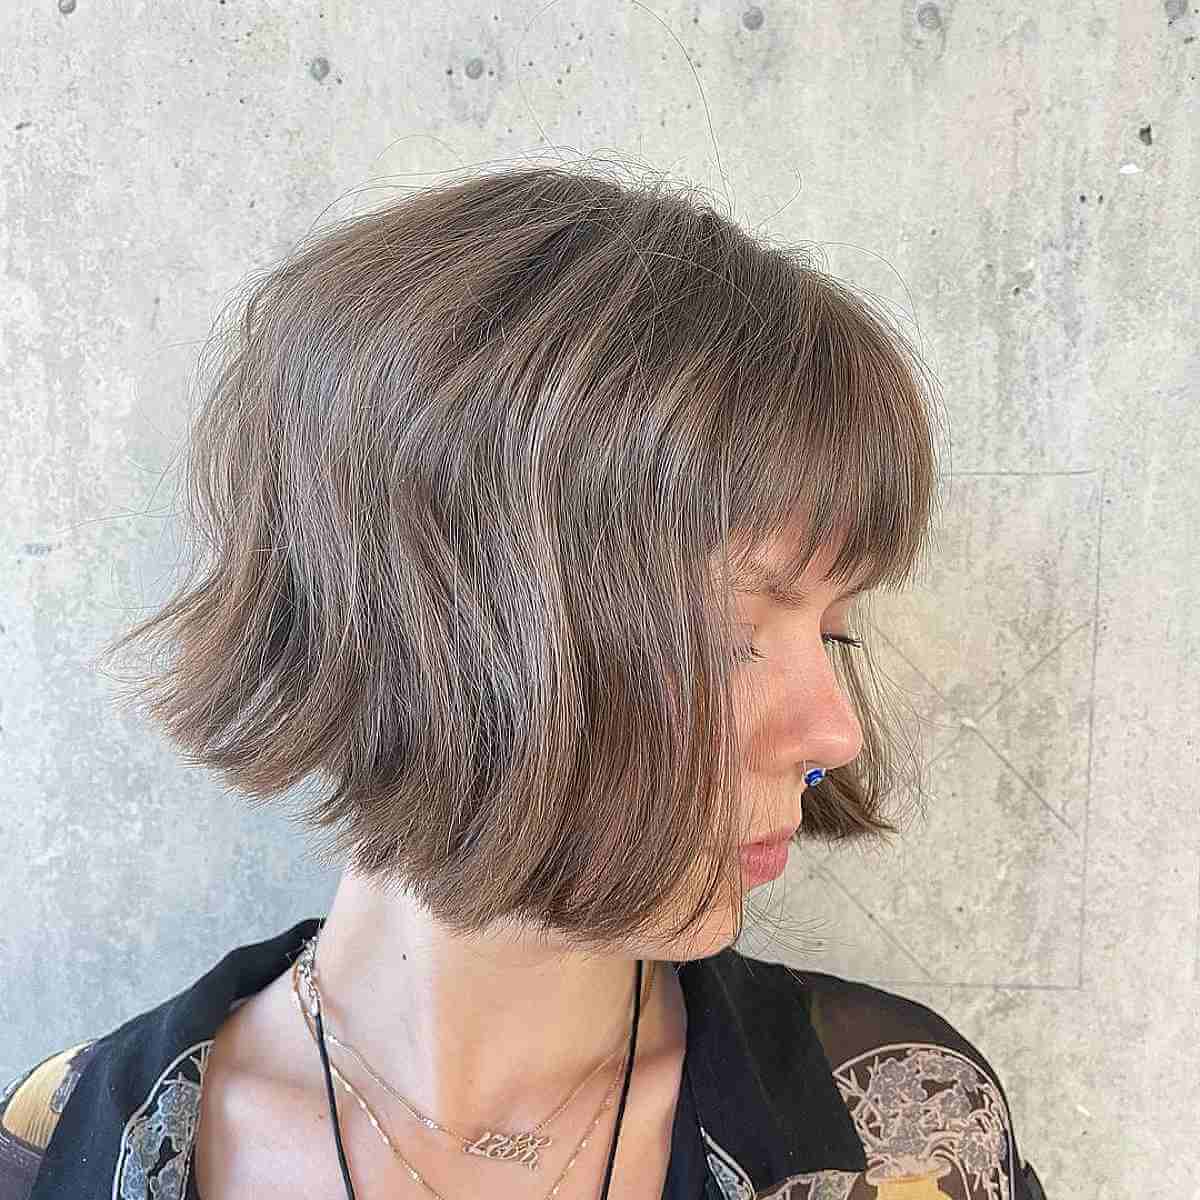 Loose Waves on Short Bobbed Hair with Bangs